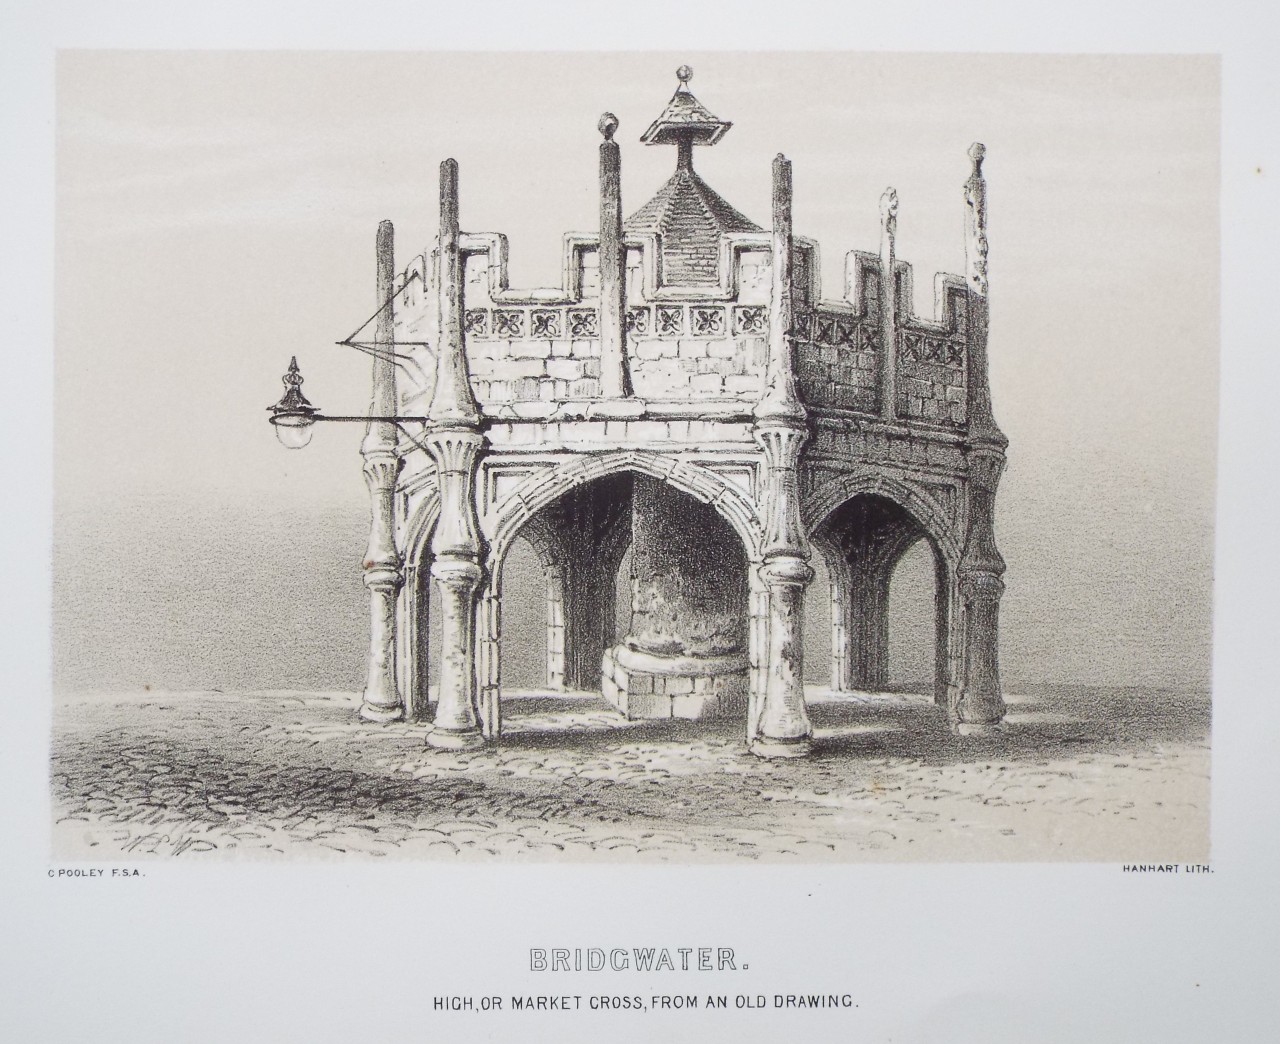 Lithograph - Bridgwater. High, or Market Cross, from an old drawing. - 